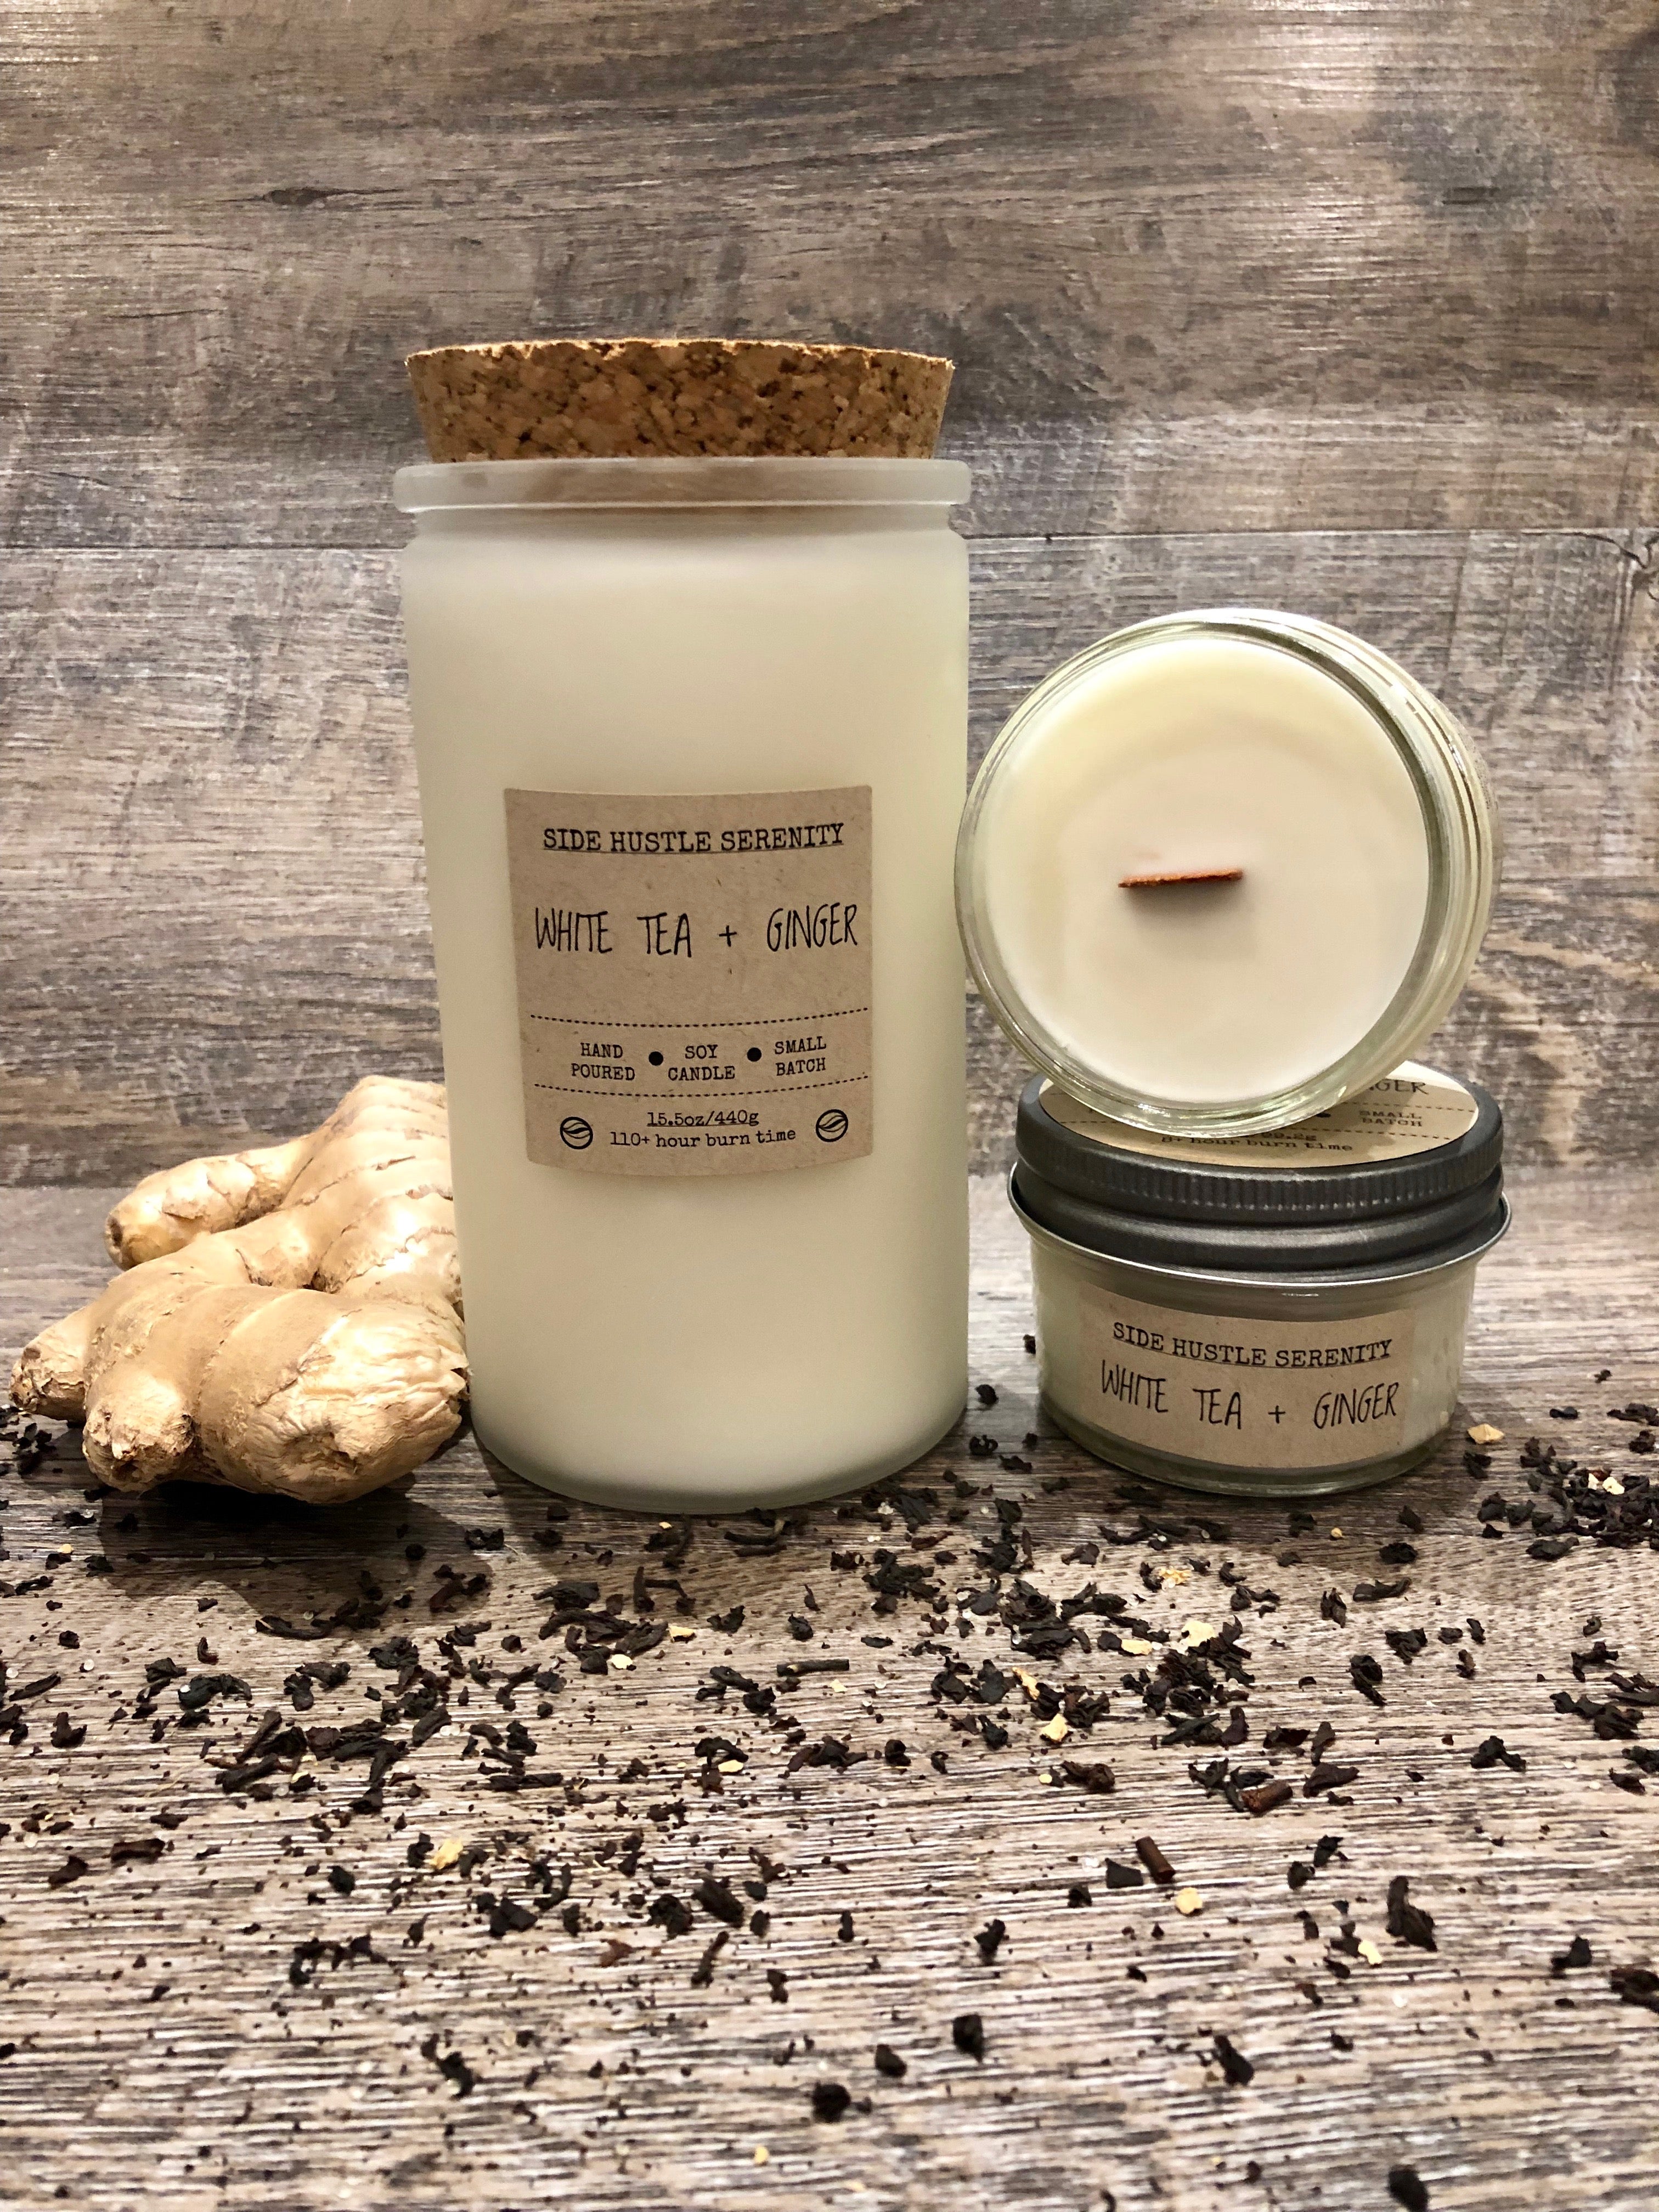 White Tea + Ginger Scented Soy Candle - Side Hustle Serenity